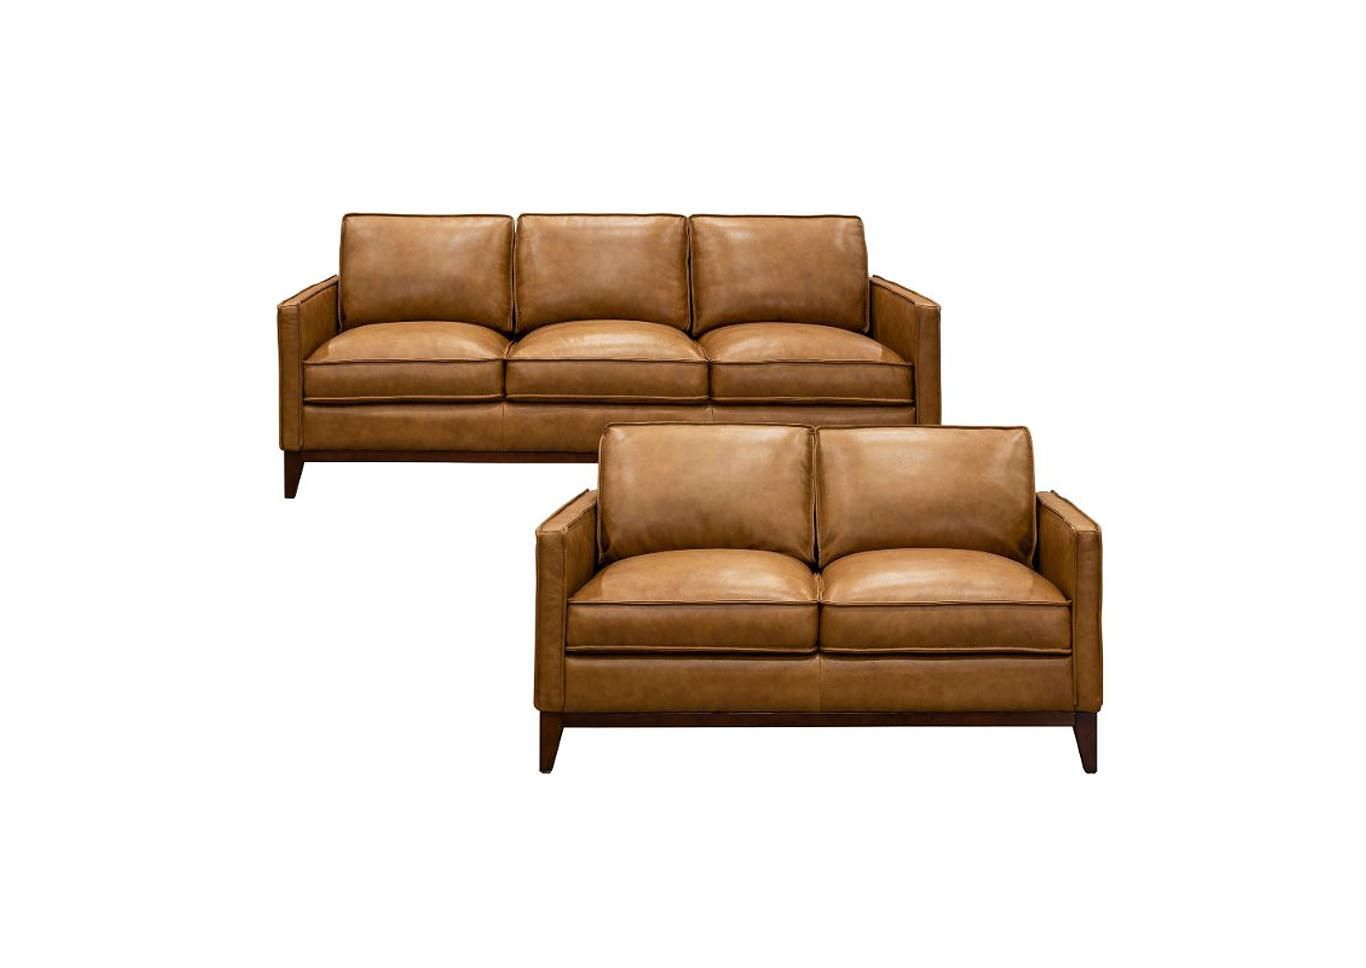 Newport Top Grain Leather Sofa And Love Seat Nader's Furniture Pertaining To Top Grain Leather Loveseats (View 12 of 15)